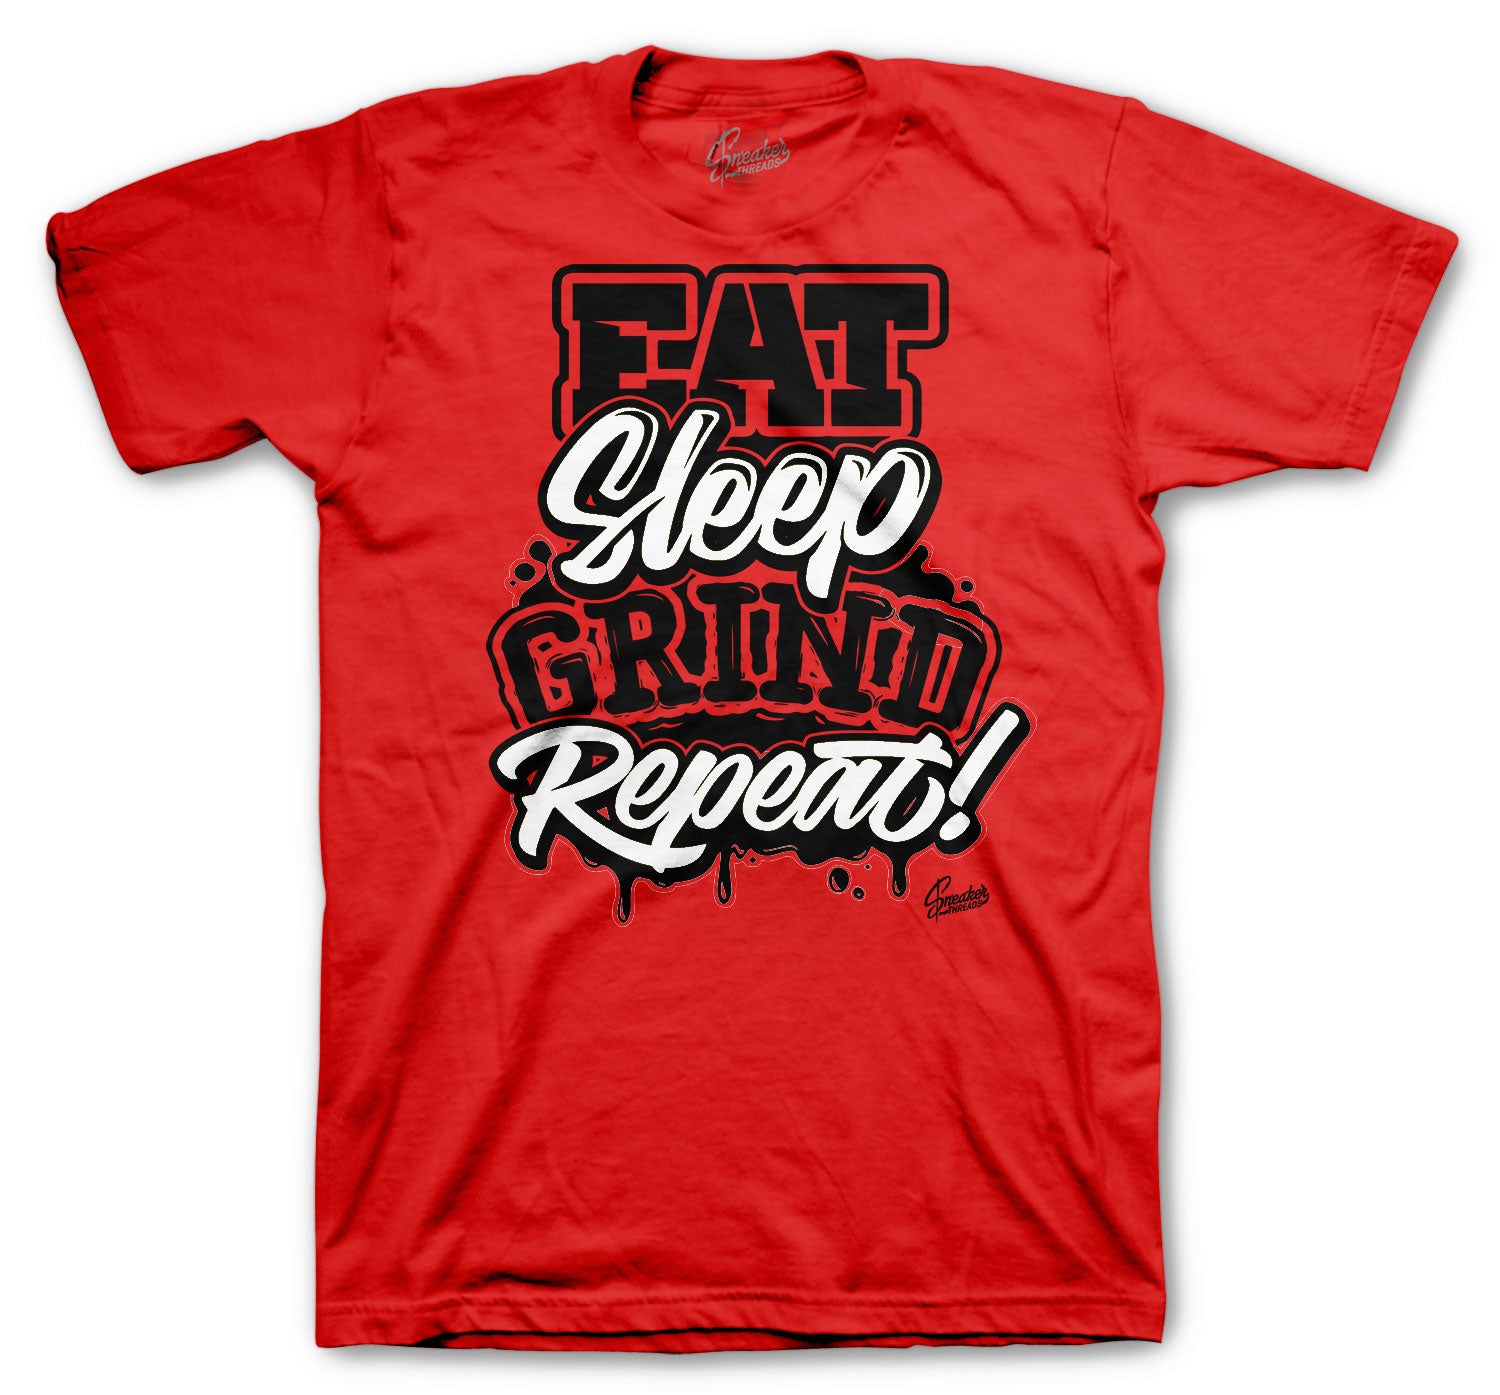 Dunk SB Chicago Shirt - Repeat - Red